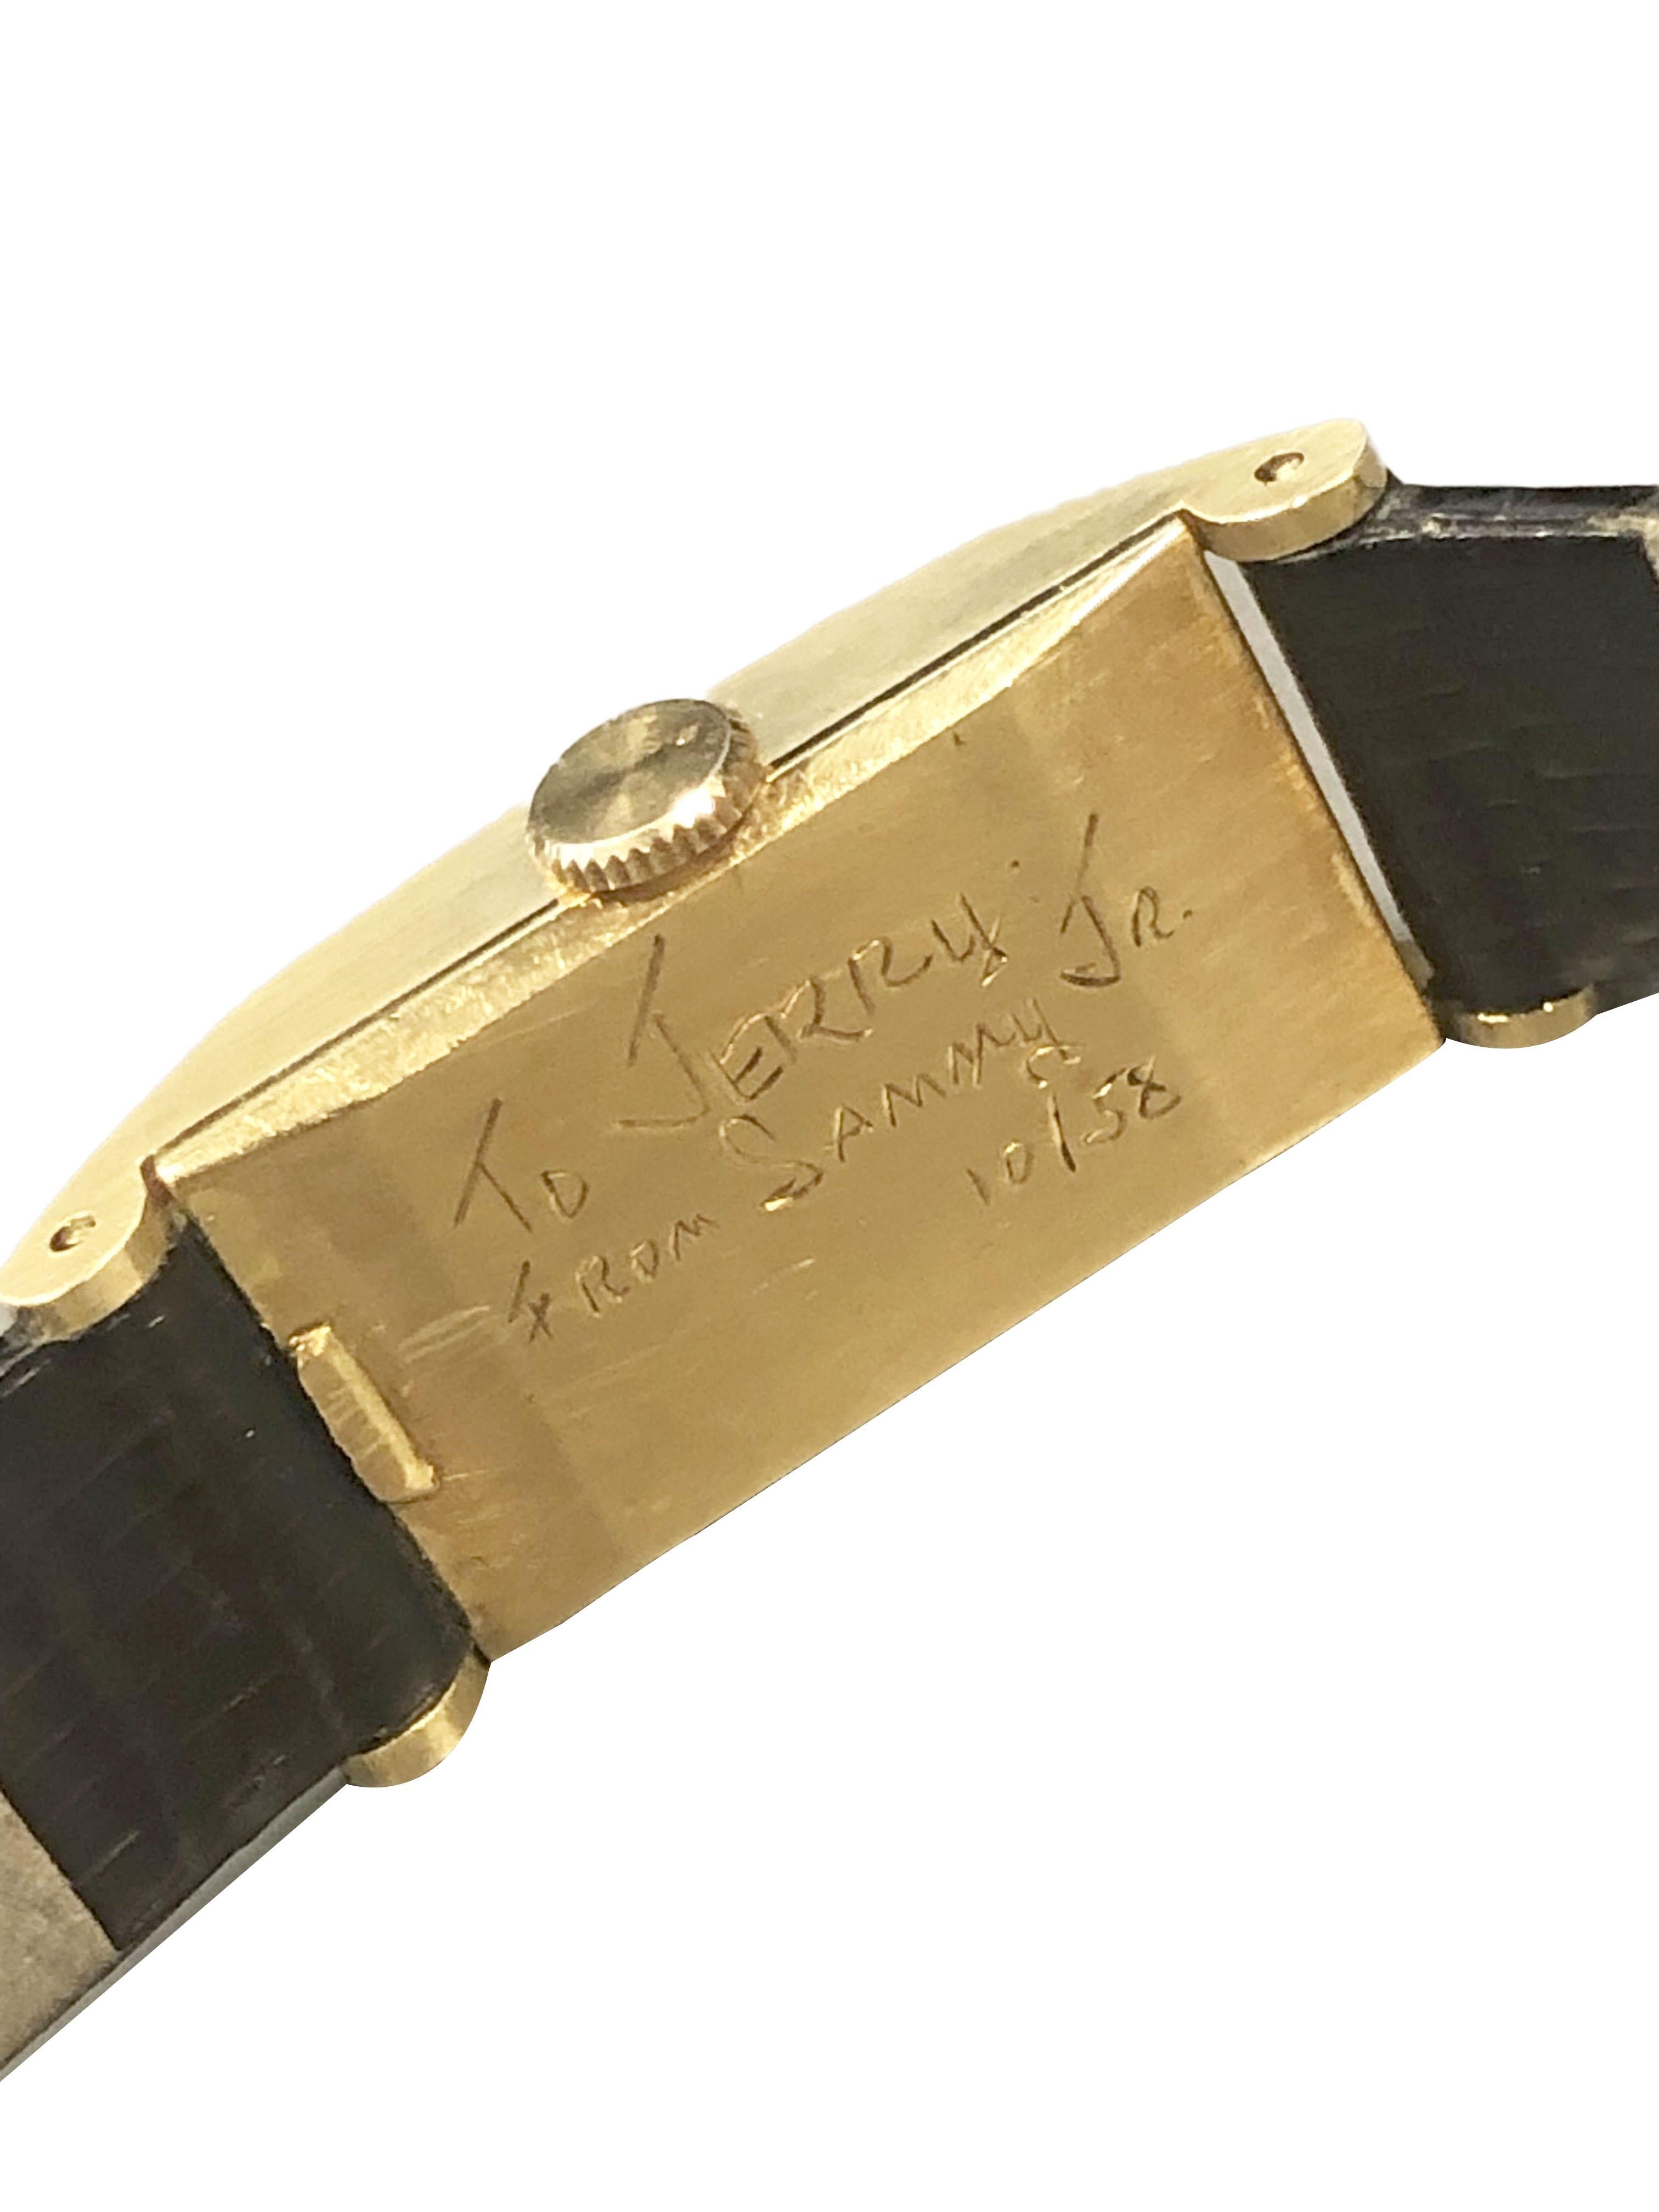 Circa 1958 Patek Philippe Wrist Watch, Presented in 1958 From Hollywood Icon Sammy Davis Jr. to his good friend and another Hollywood Icon Jerry Lewis.  33 X 10 M.M. 18K Yellow Gold 2 Piece case. 19 Jewel Nickel Lever Mechanical, Manual wind